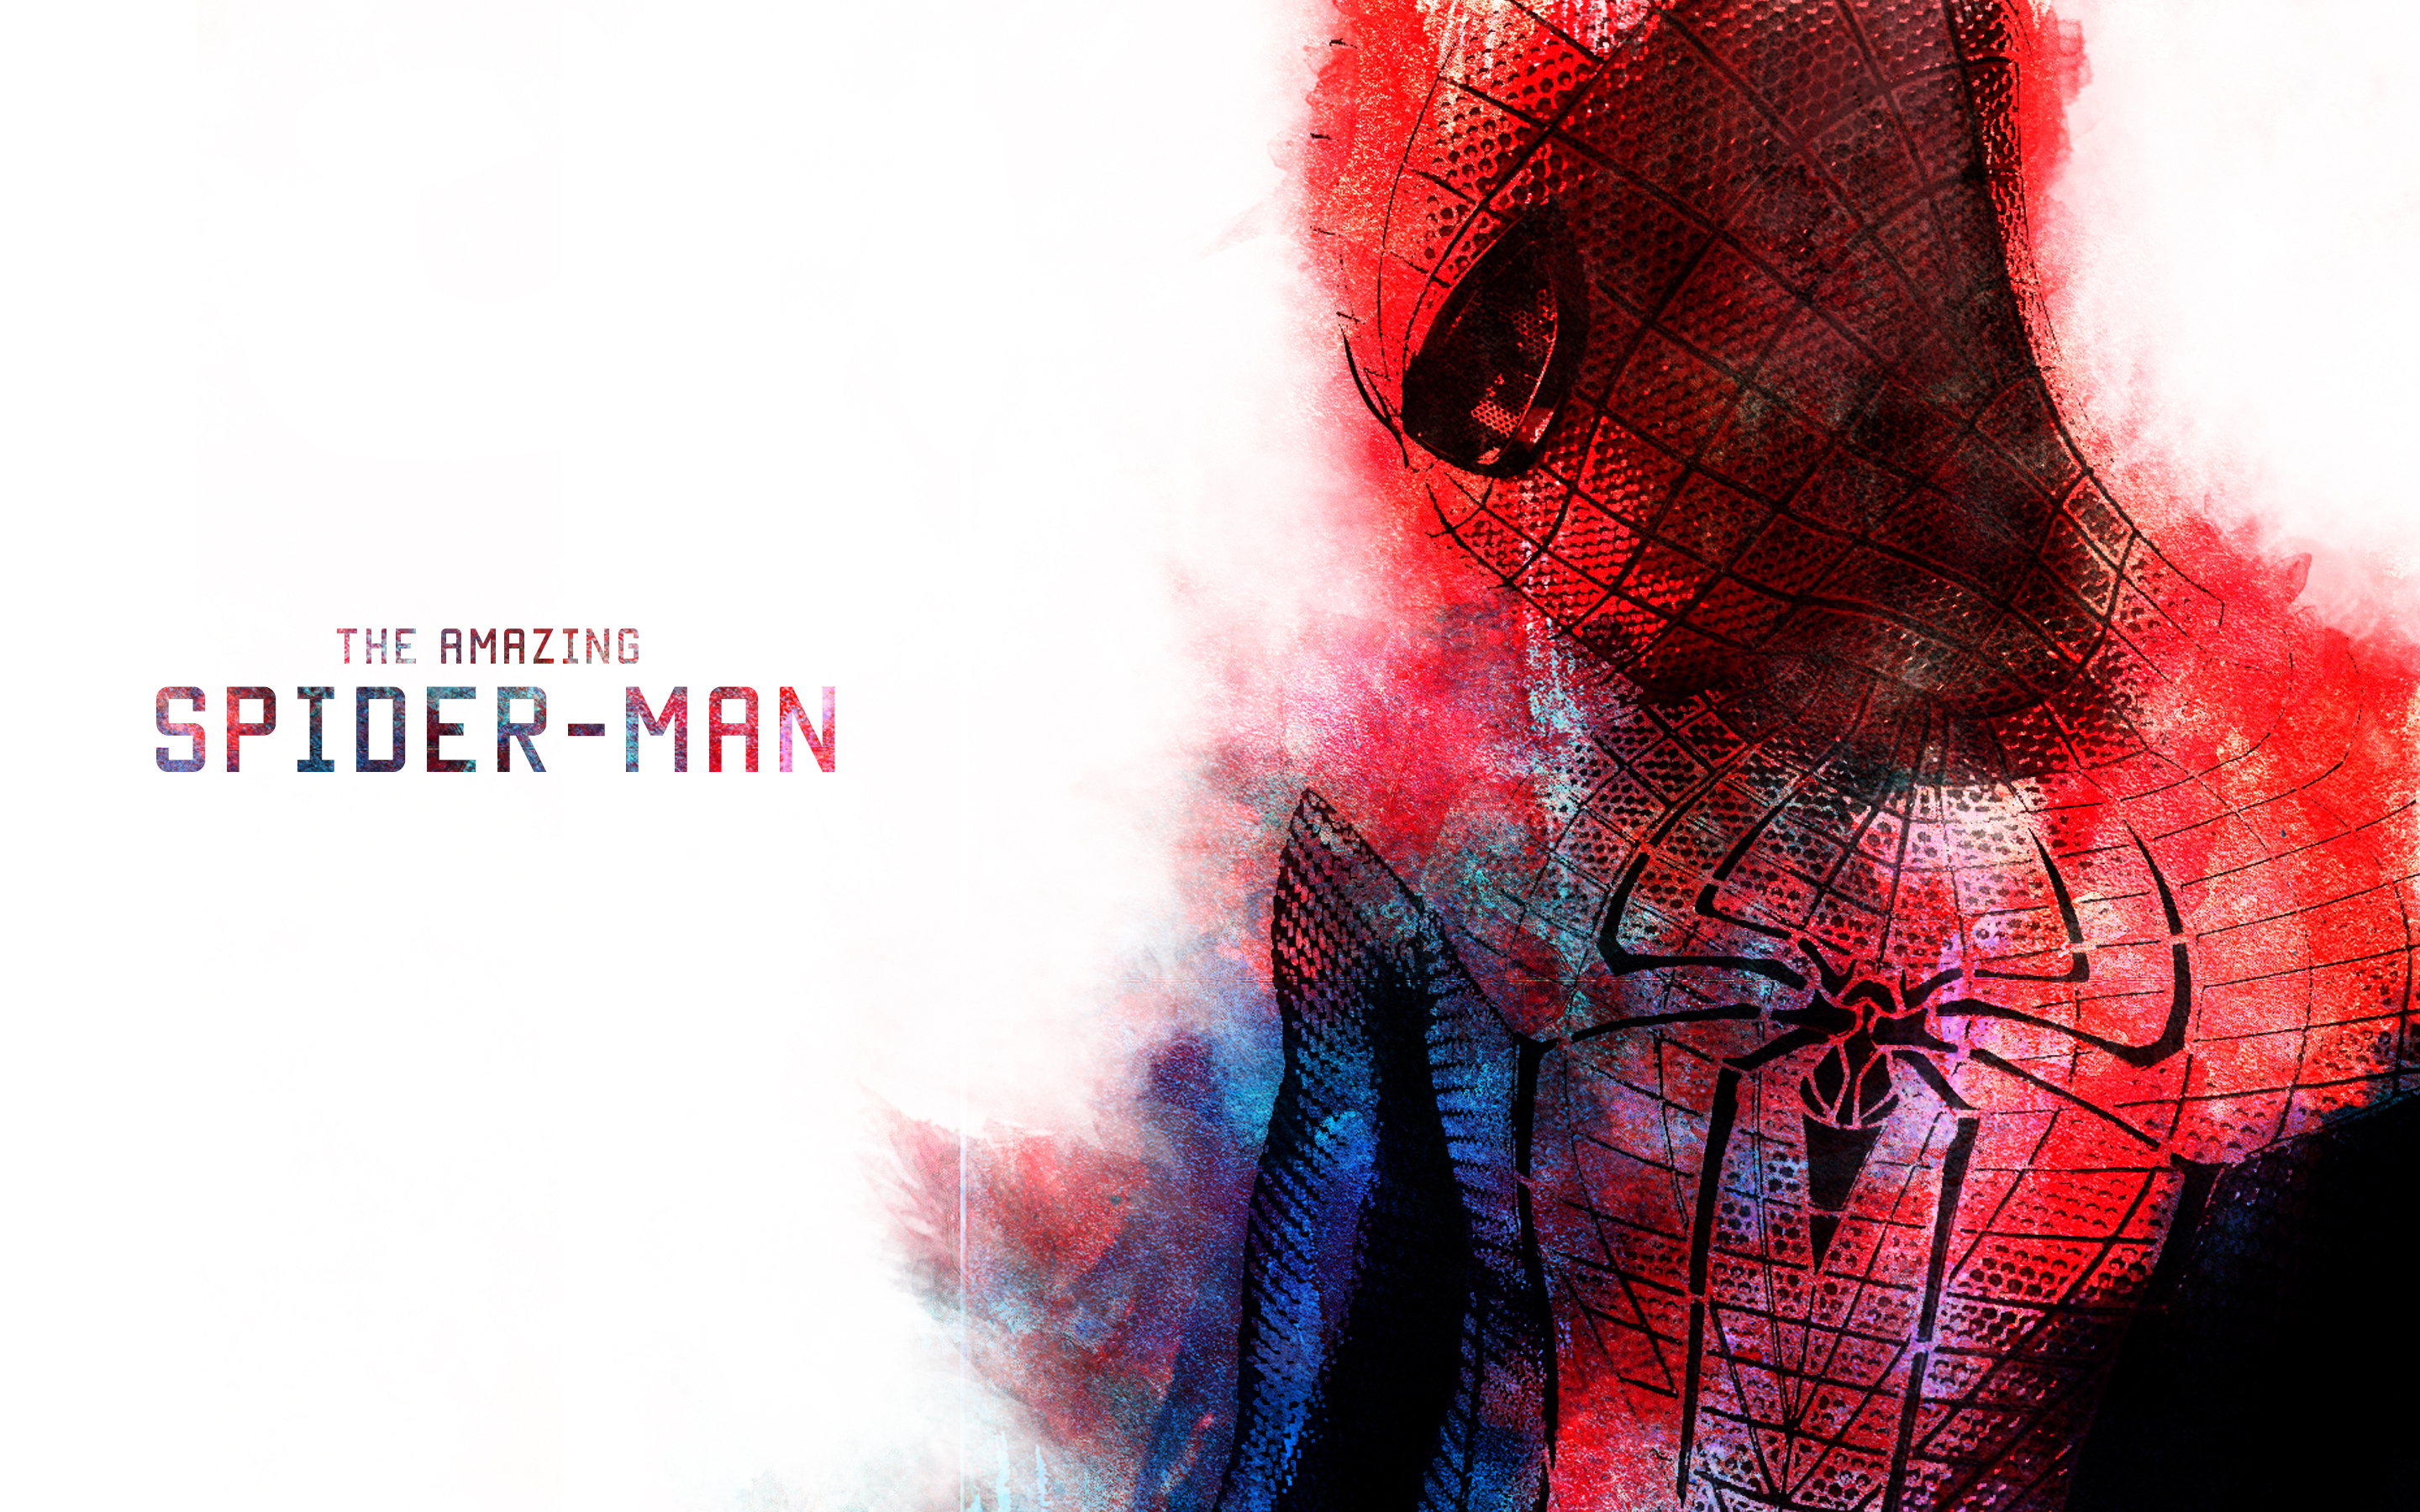  Amazing Spider Man HD Wallpaper in High Resolution at Movies Wallpaper